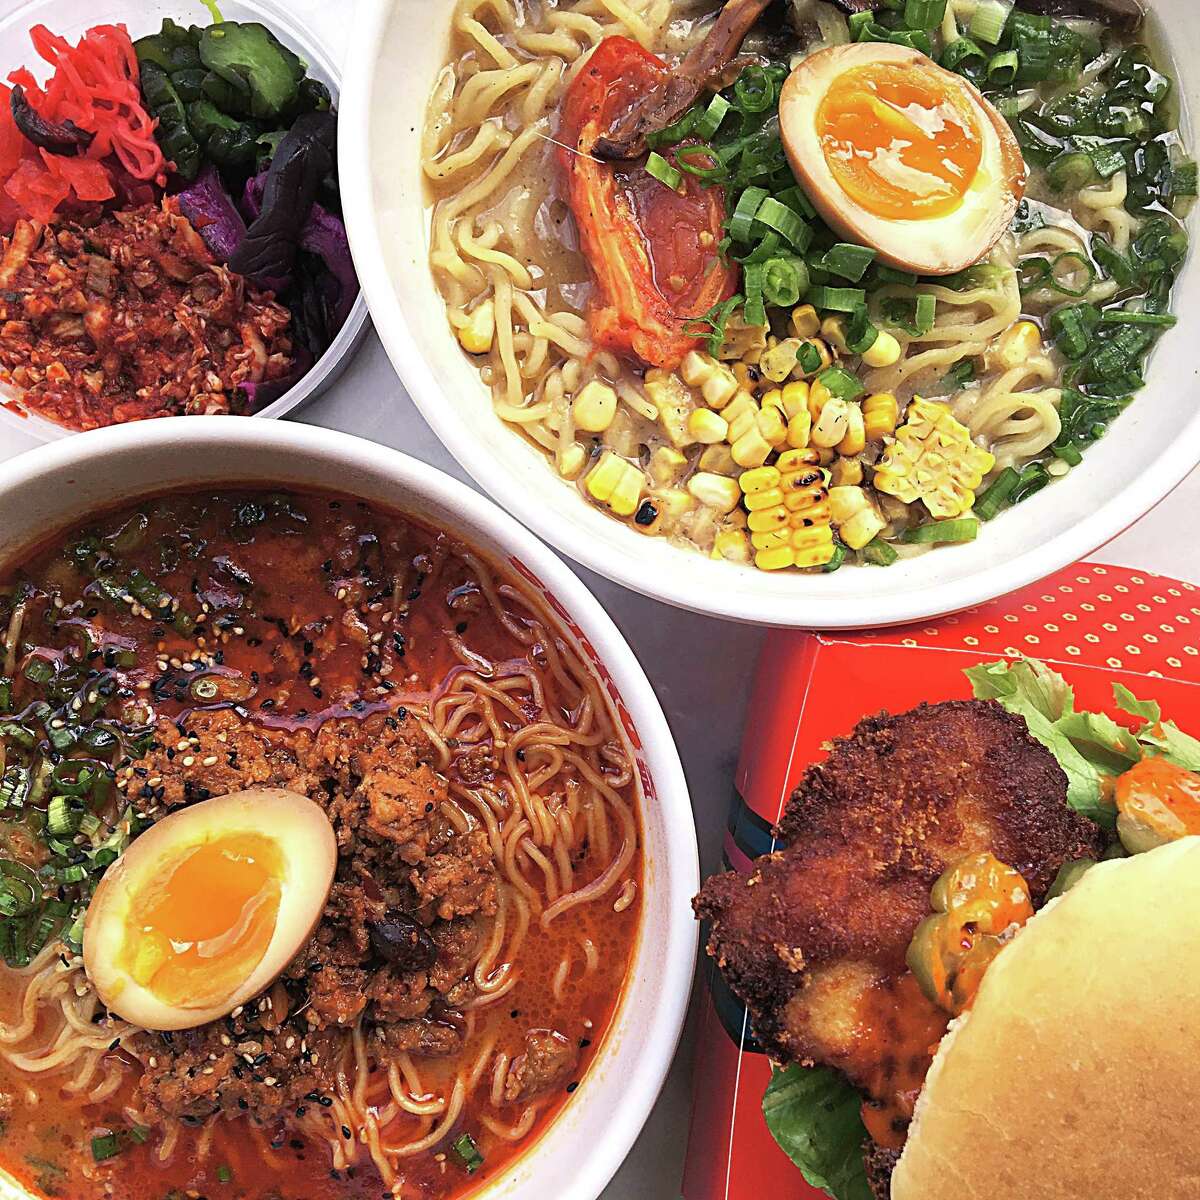 Food from Tenko Ramen at the Bottling Department food hall at The Pearl. Clockwise from top left: kimchi, Double Mushroom ramen, chicken katsu sandwich and Spicy Miso Tantan-men ramen.